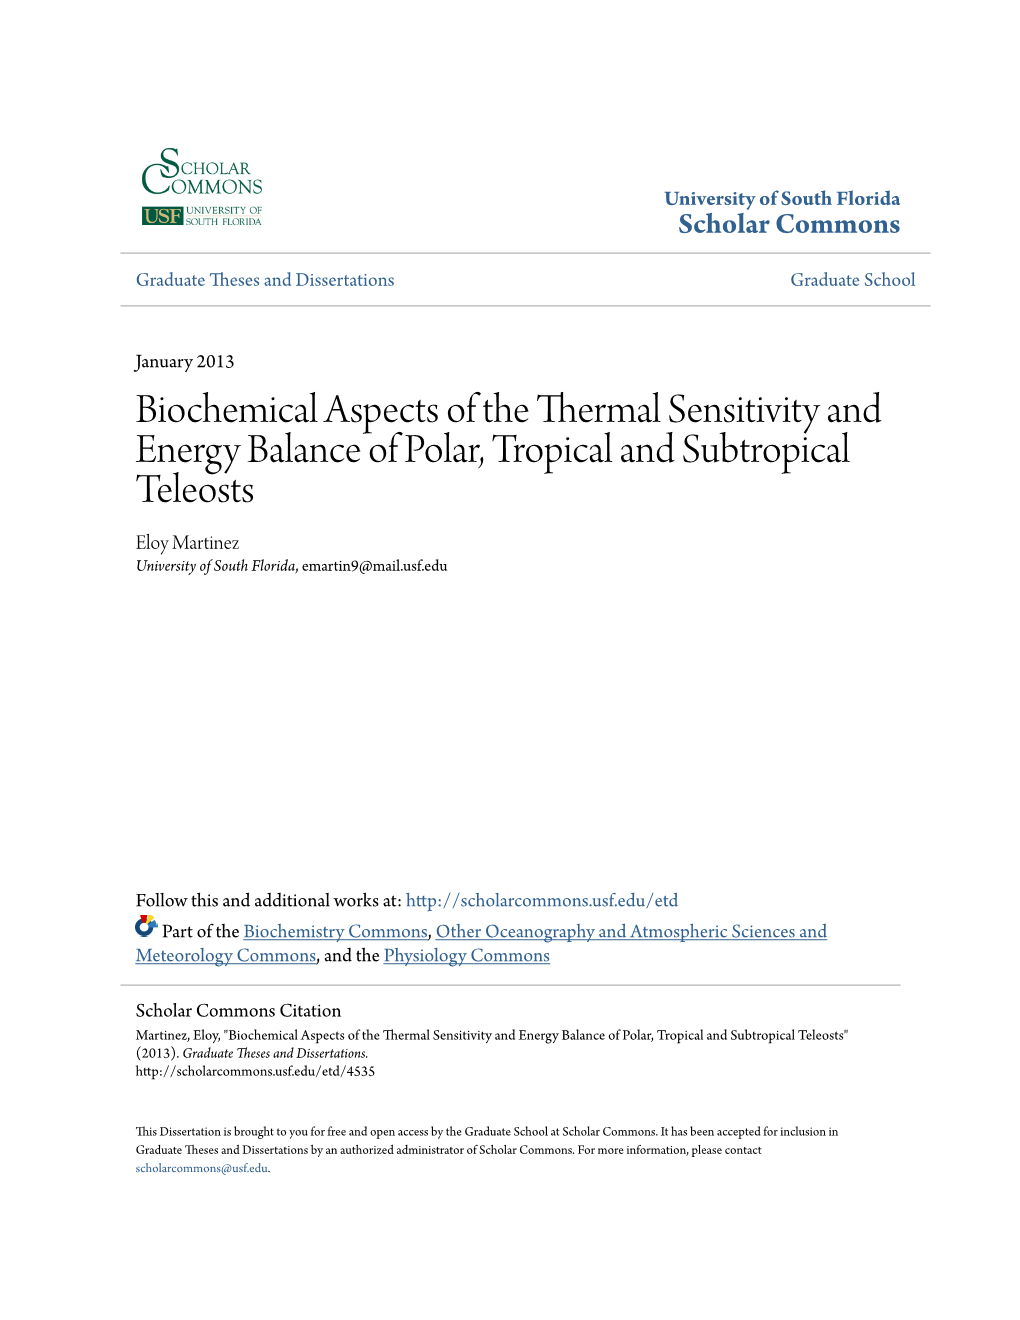 Biochemical Aspects of the Thermal Sensitivity and Energy Balance Of